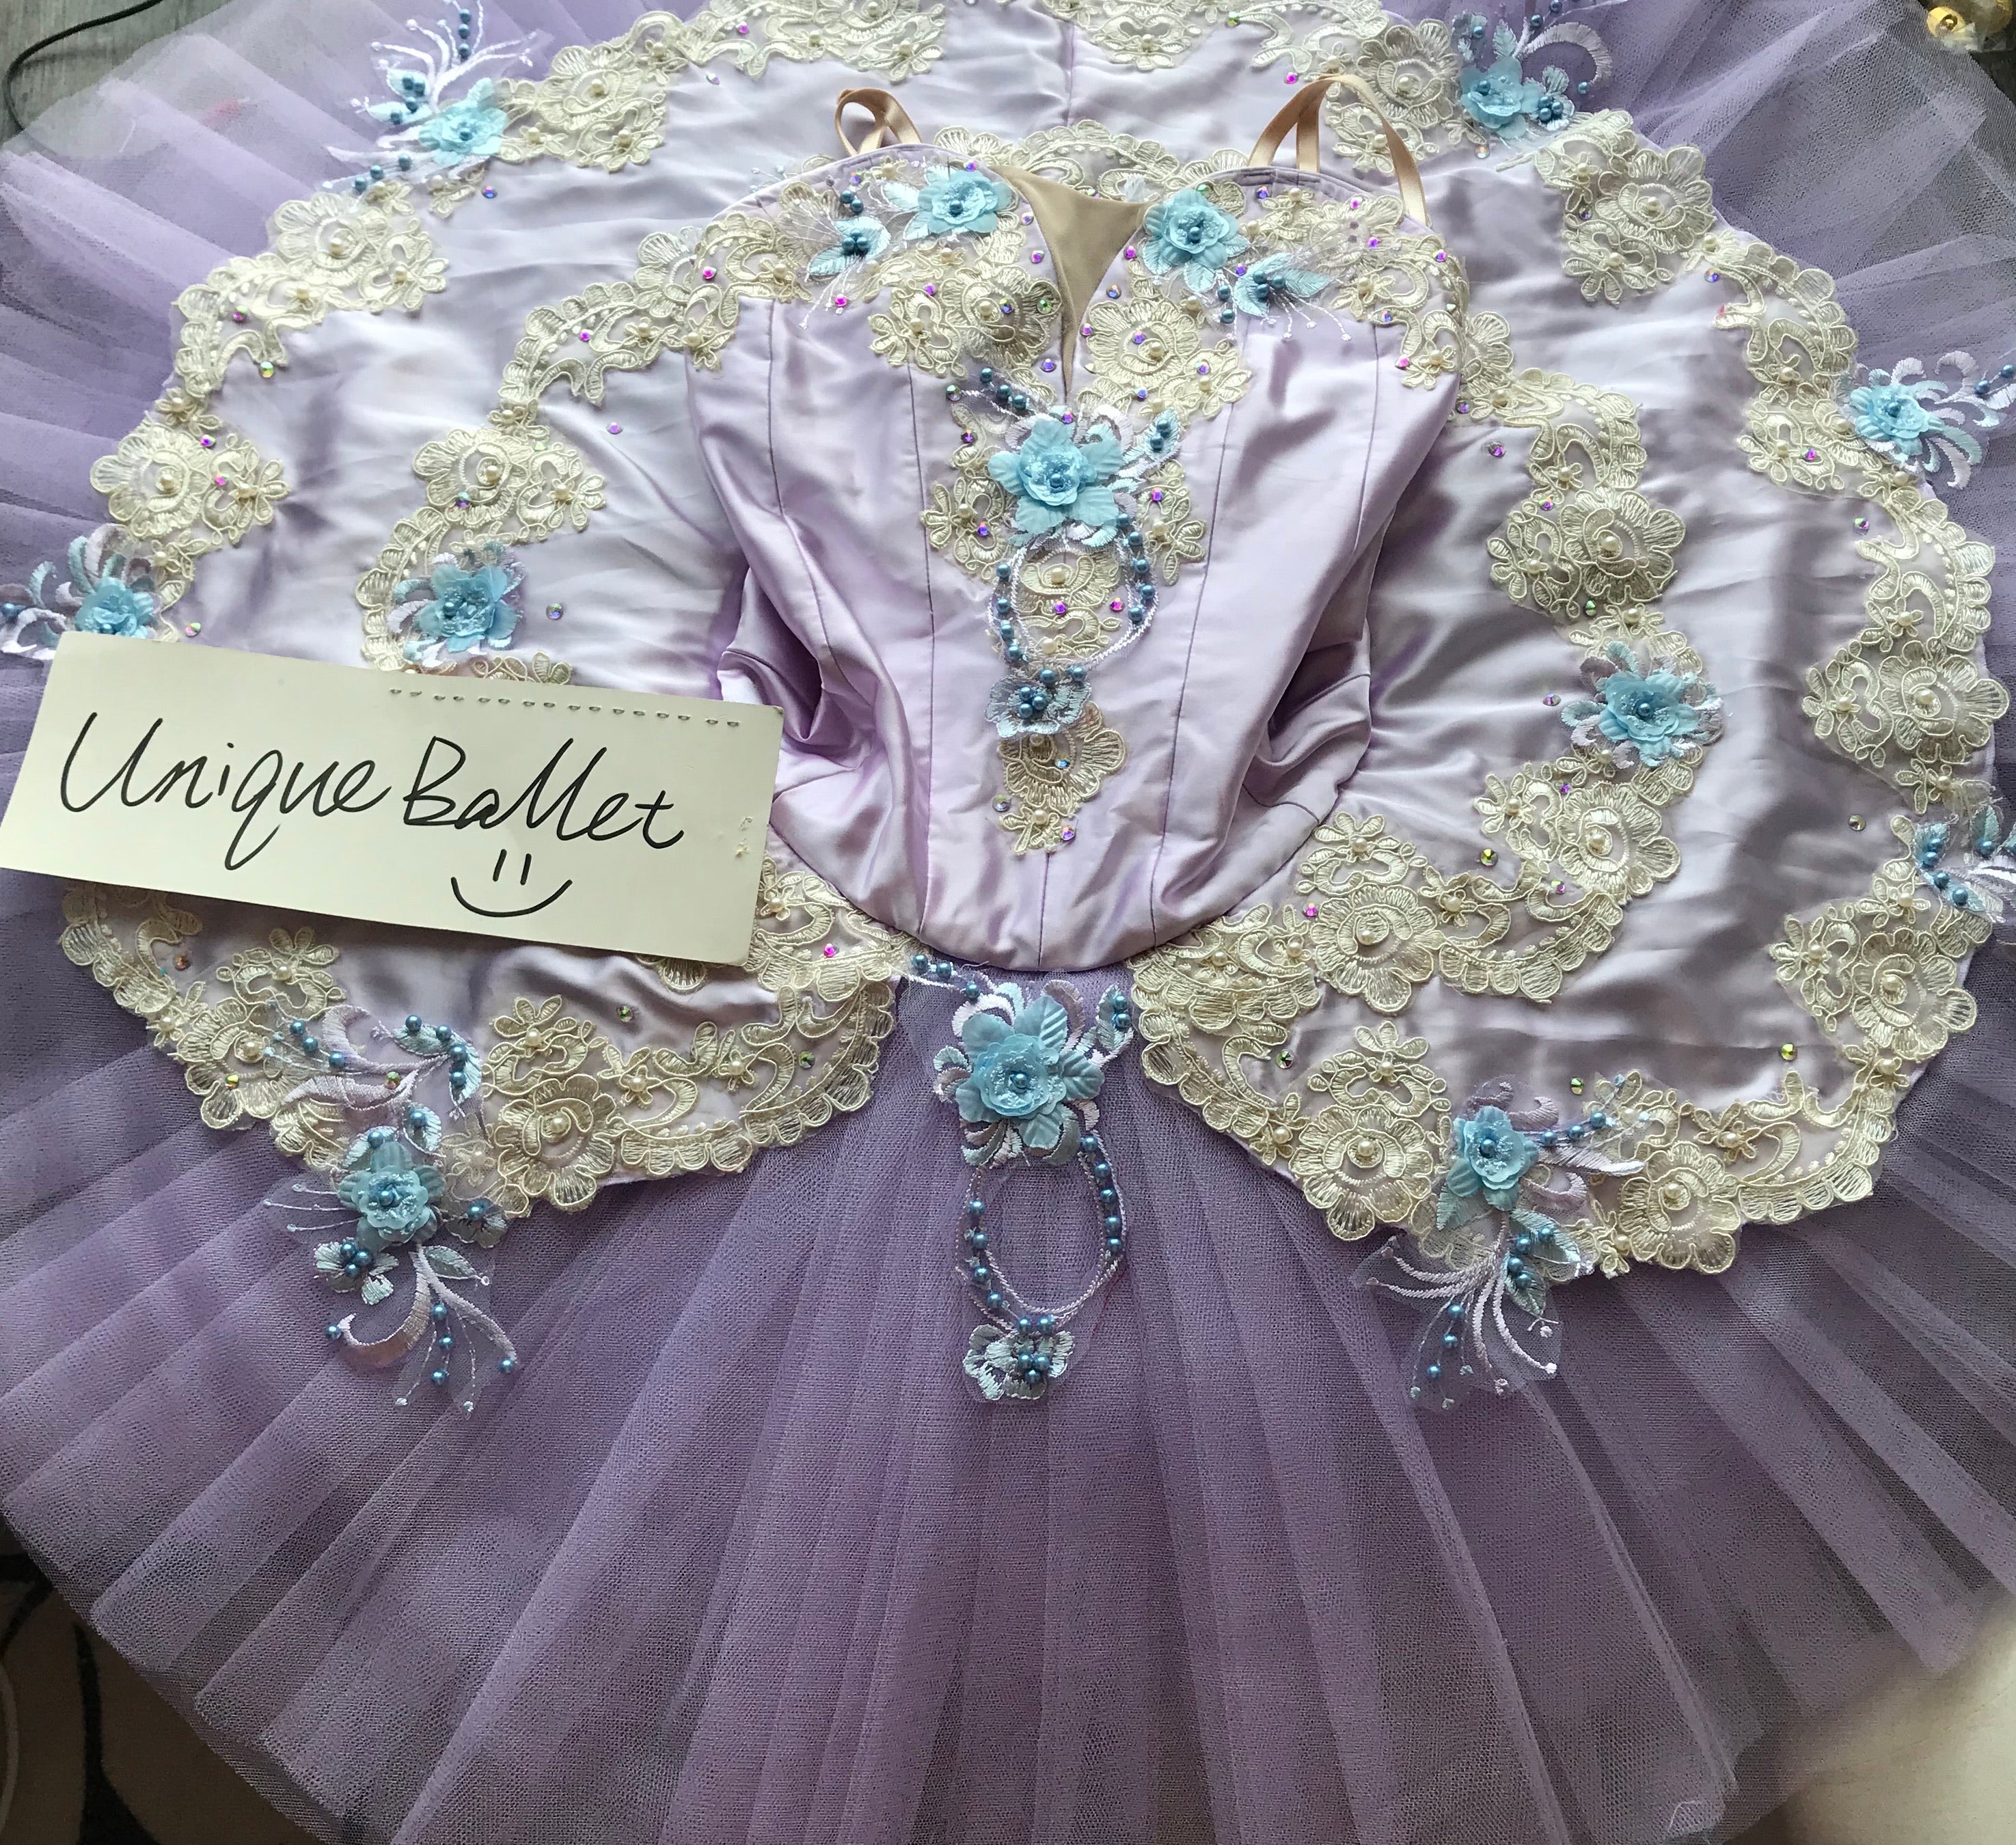 **Sample Discount**Professional Sleeping Beauty Lilac Fairy Ballet Costume Classical Platter TuTu YAGP Stage Dance Wear With Hooks